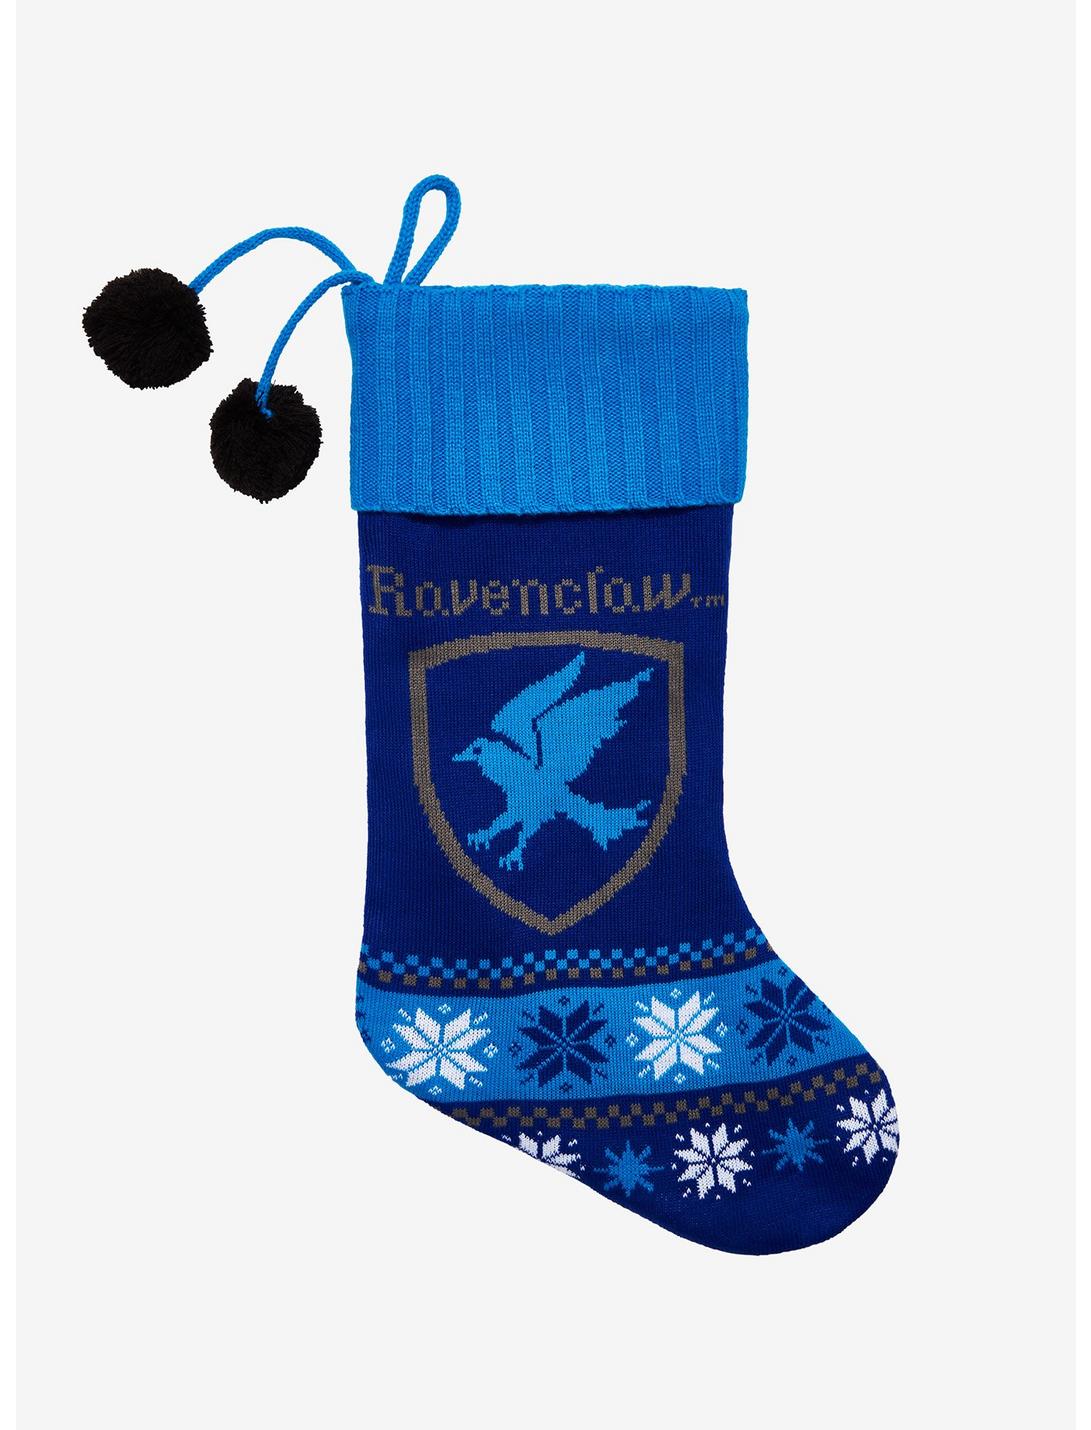 Harry Potter Ravenclaw Knit Stocking Hot Topic Exclusive, , hi-res